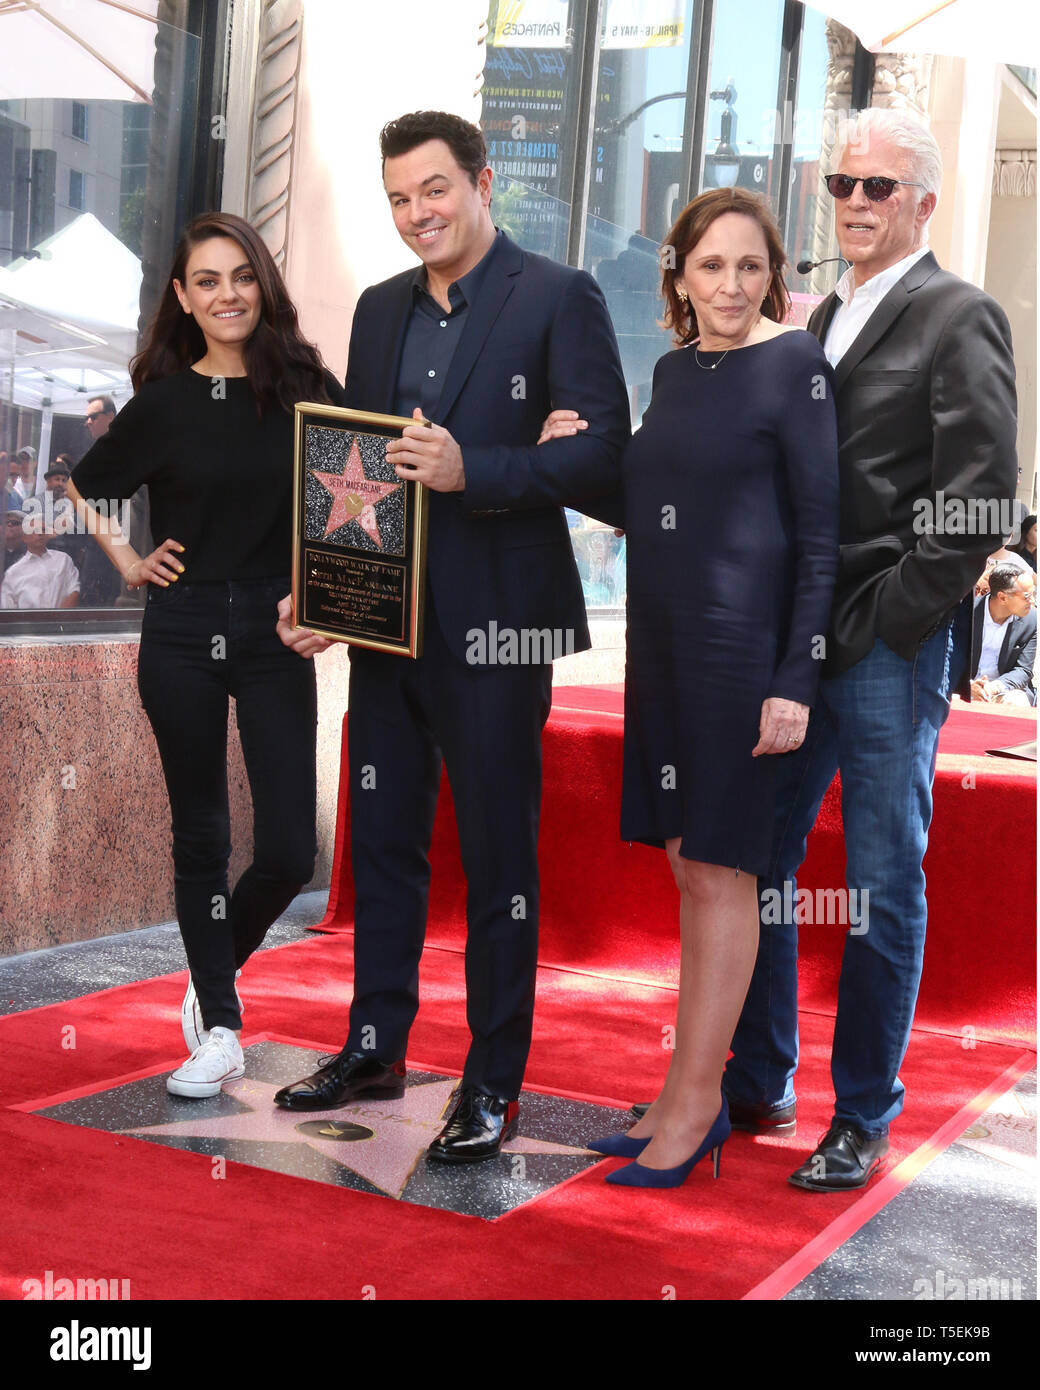 April 23, 2019 - Los Angeles, CA, USA - LOS ANGELES - APR 23:  Mila Kunis, Seth MacFarlane, Ann Druyan, Ted Danson at the Seth MacFarlane Star Ceremony on the Hollywood Walk of Fame on April 23, 2019 in Los Angeles, CA (Credit Image: © Kay Blake/ZUMA Wire) Stock Photo